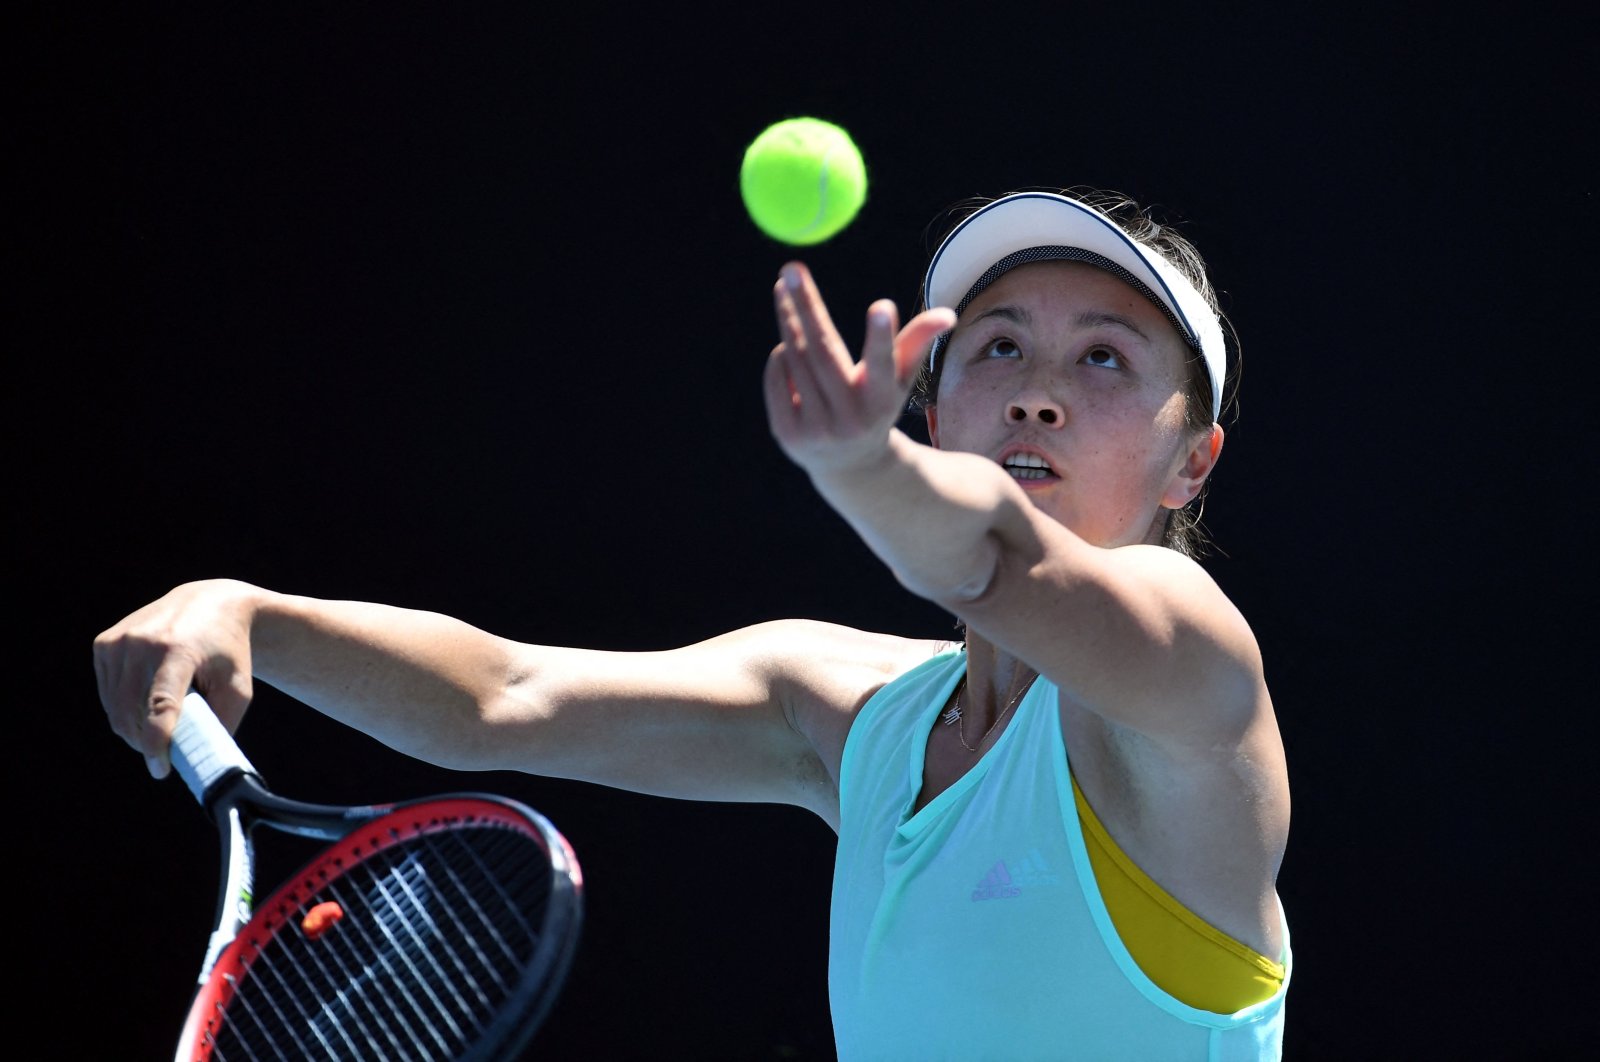 China&#039;s Peng Shuai serving the ball during a practice session ahead of the Australian Open tennis tournament in Melbourne, Australia, Jan. 13, 2019. (Photo by AFP)